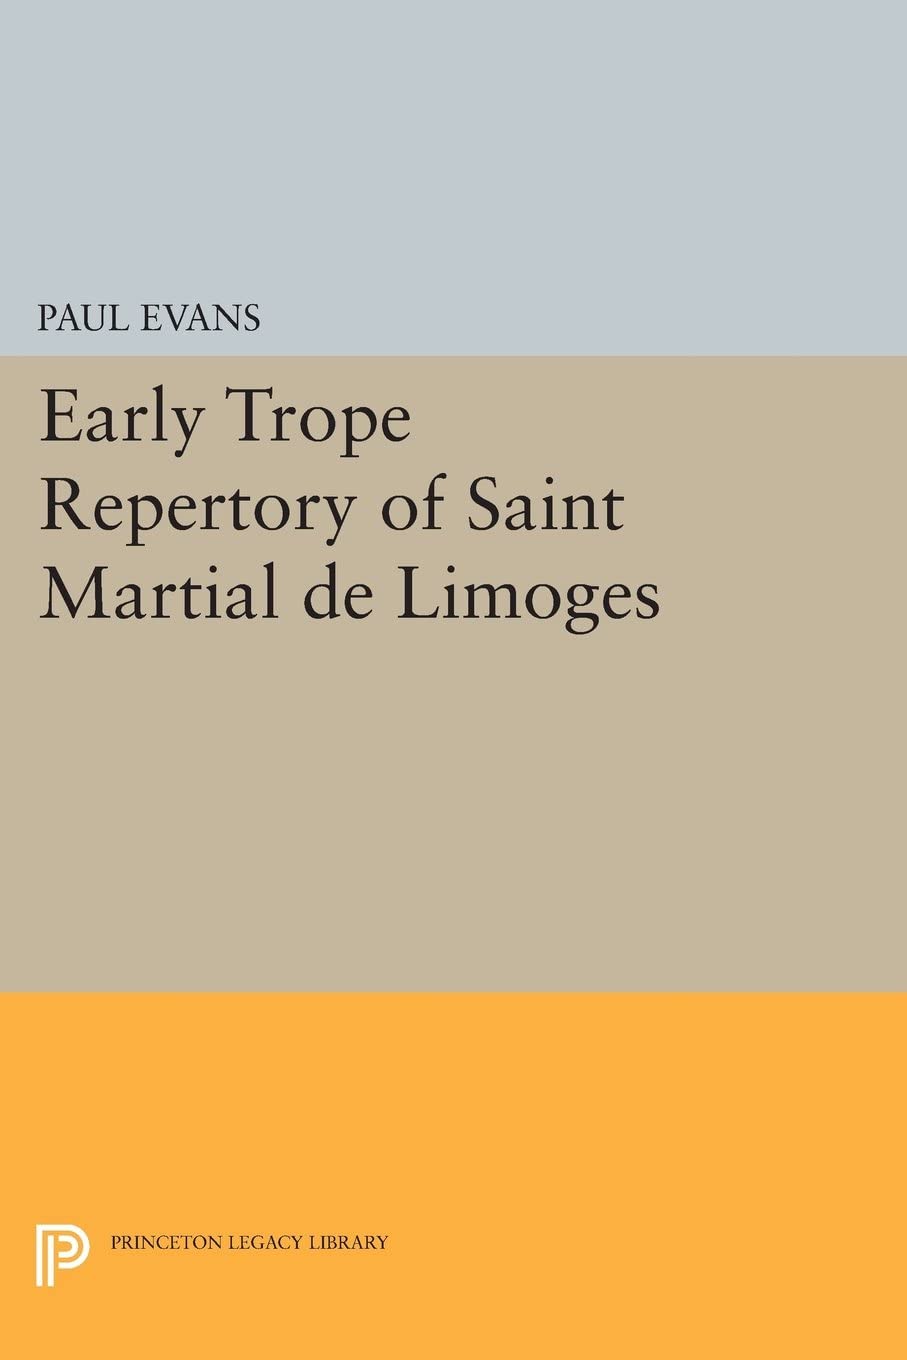 Early Trope Repertory of Saint Martial de Limoges (Princeton Legacy Library, 4052)